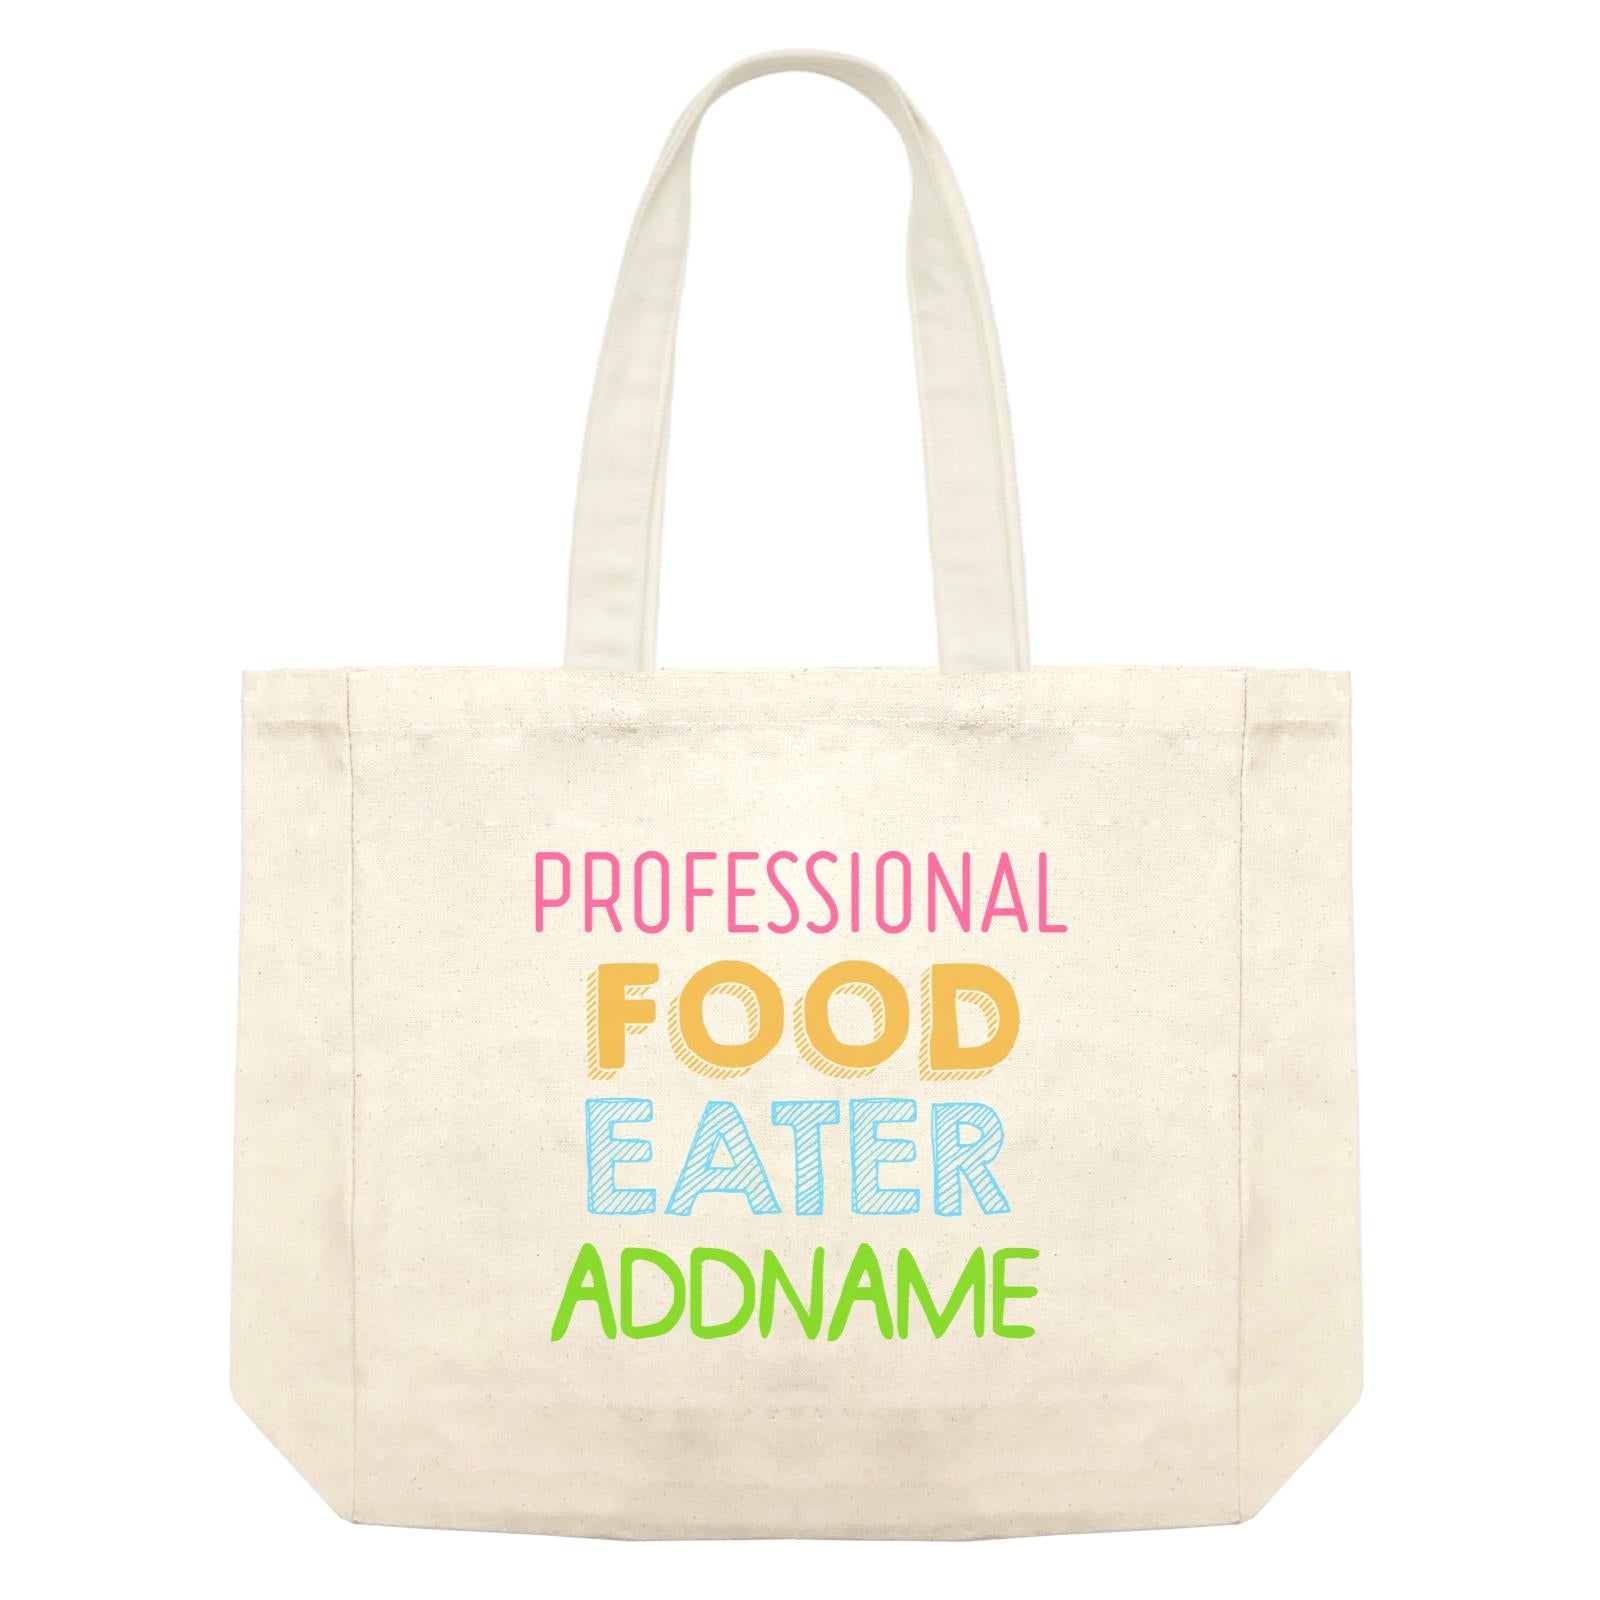 Professional Food Eater Addname Shopping Bag